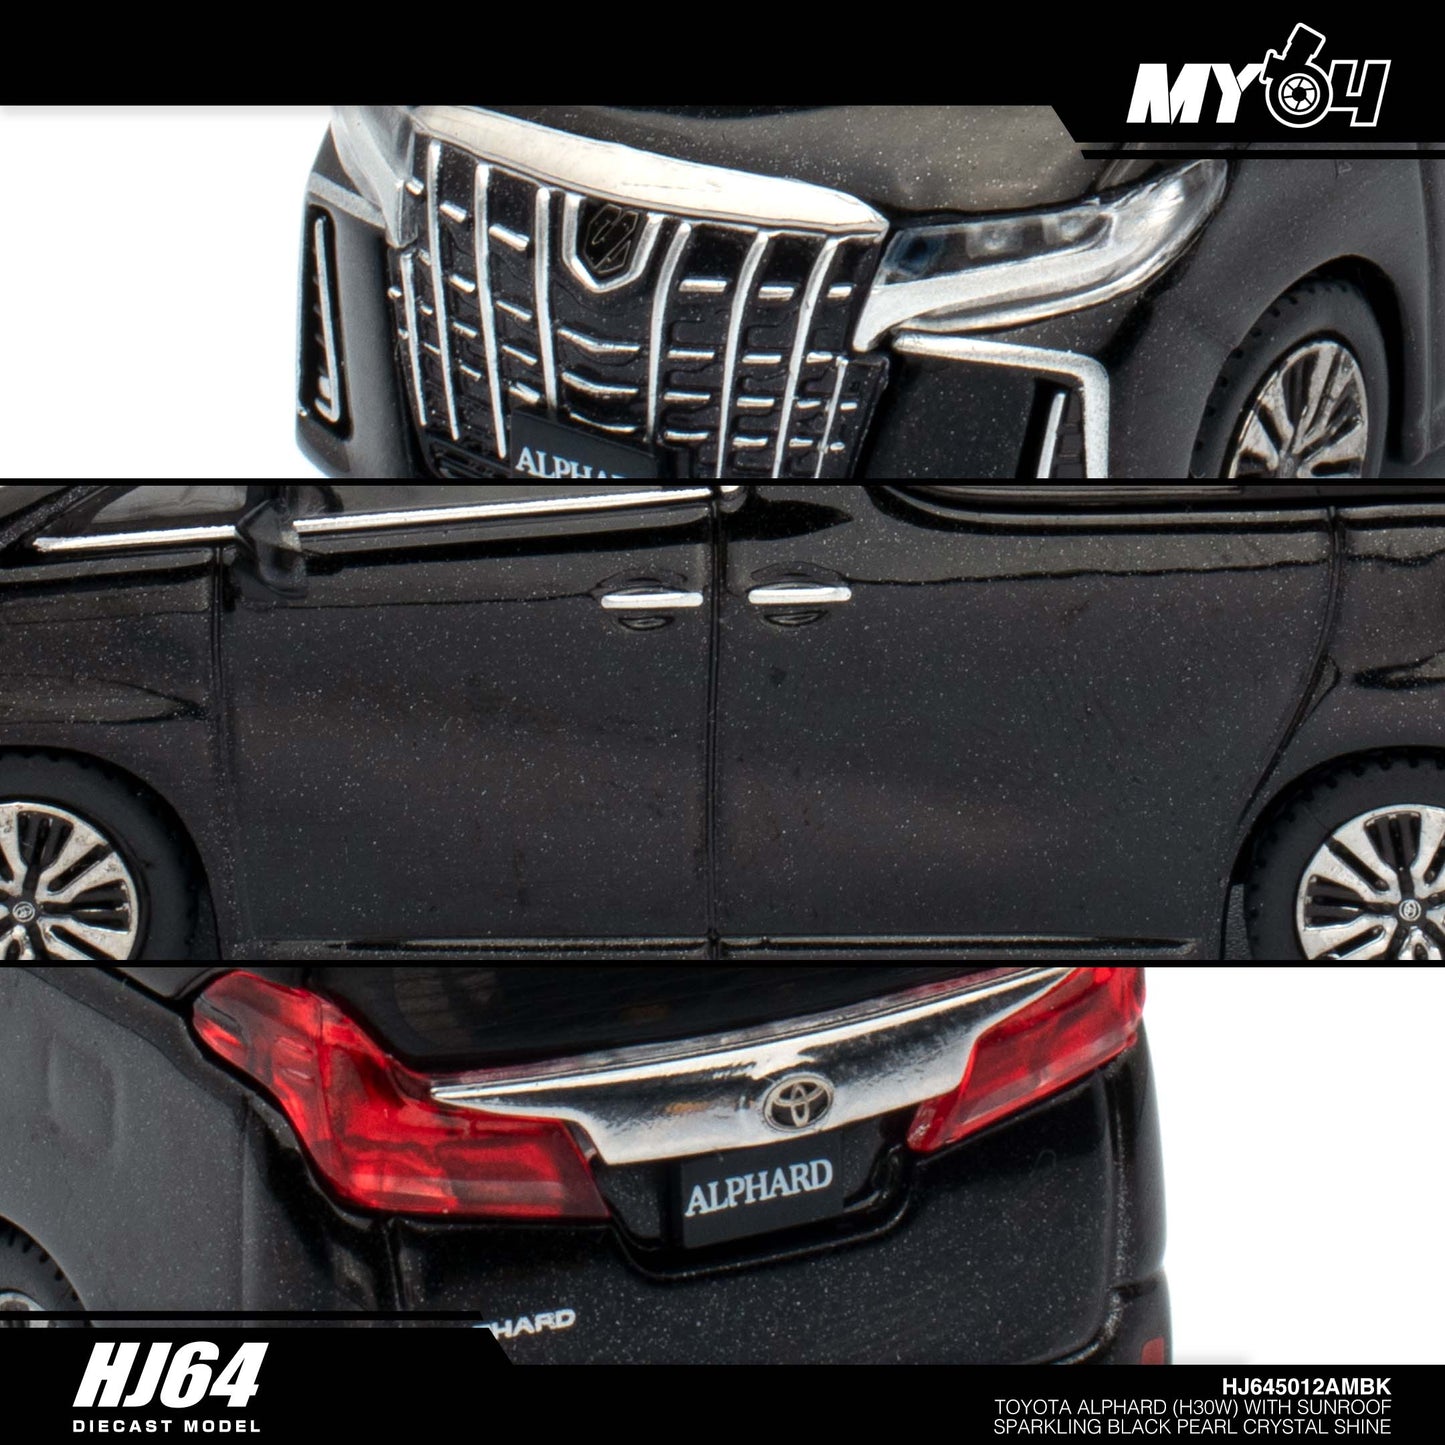 [Hobby Japan] Toyota Alphard (H30W) With Sun Roof - Sparkling Black Pearl Crystal Shine